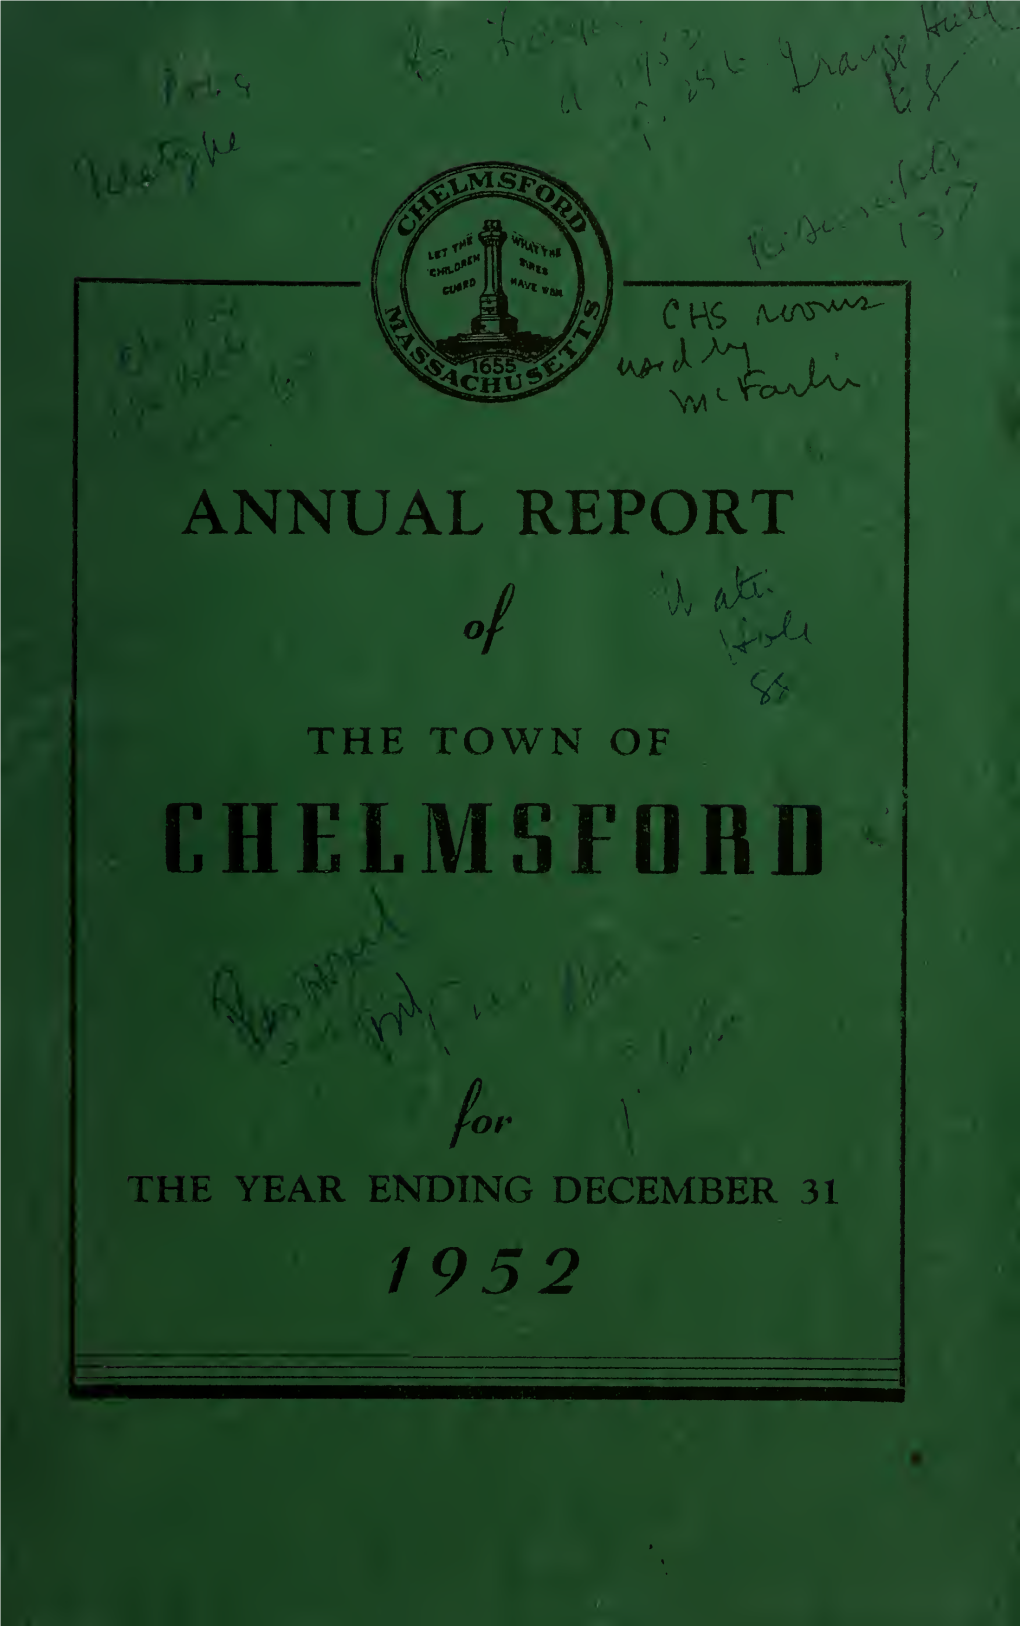 Annual Report of the Town of Chelmsford